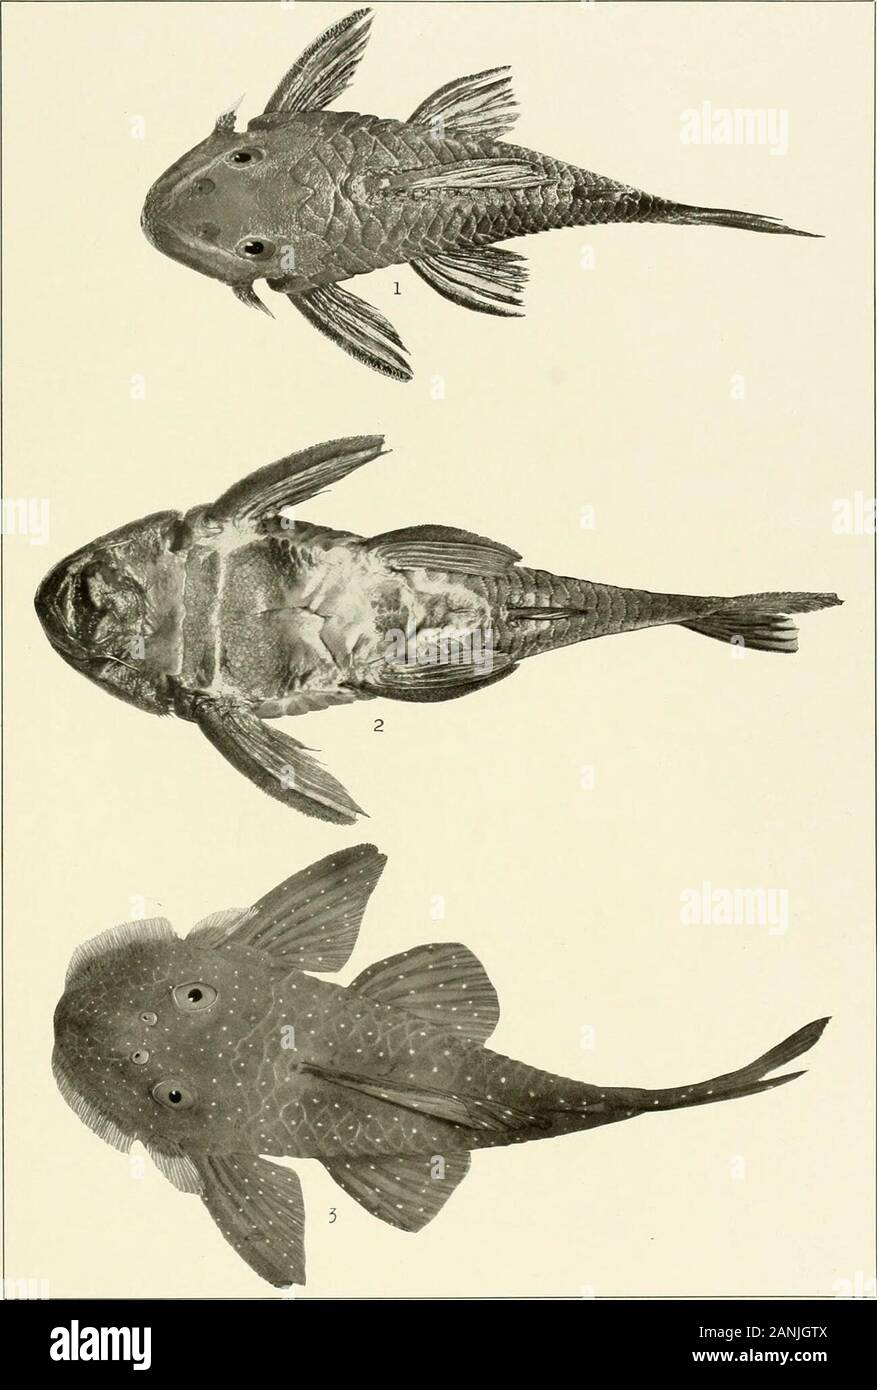 The freshwater fishes of British Guiana, including a study of the ecological grouping of species and the relation of the fauna of the plateau to that of the lowlands . 1-3. Corymbophanes andersoni Eigenmann. (Type.) 86 mm. No. 1001. Memoirs Carnegie Museum, Vol V. Plate XXVIII.. 1-2. Hemiancistrus braueri Eigenmann. (Type.) 120 mm. In Berlin Museum. (Coll. Schomburgk.3. Pseudancistrusbarbatw (Cuvier and Valenciennes). 140 mm. No. 1533. Memoirs Carnegie Museum, Vol. V. Plate XXIX. Stock Photo